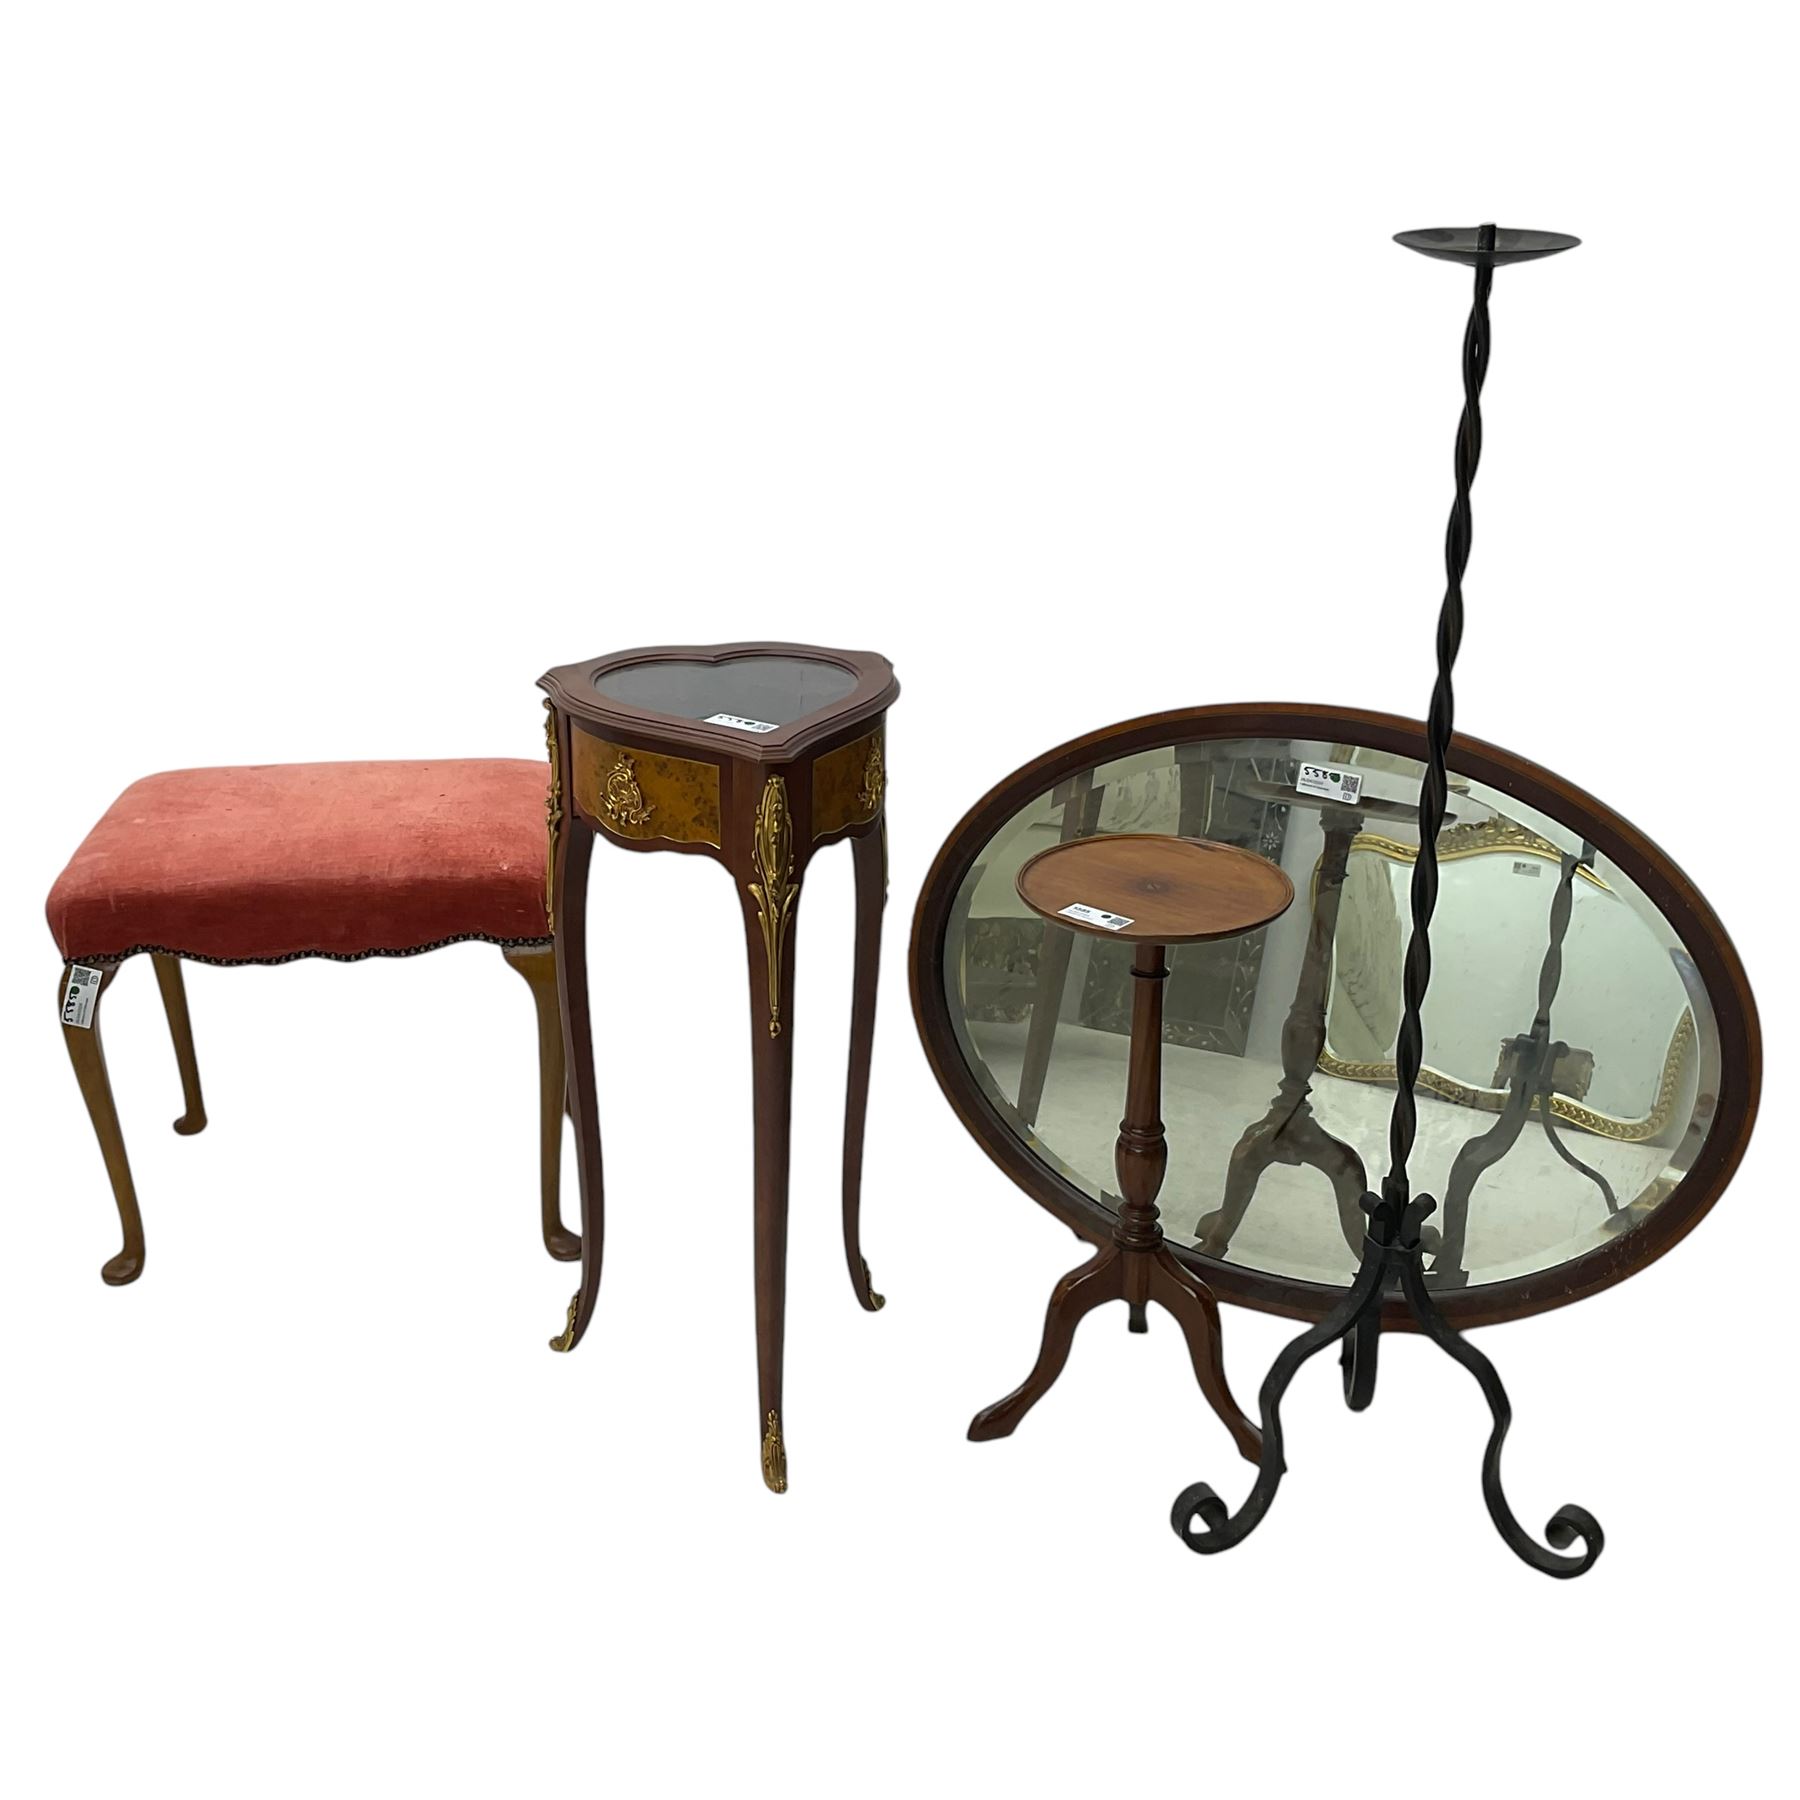 20th century cabriole leg stool; heart shaped bijouterie cabinet; wrought metal candle stand; small